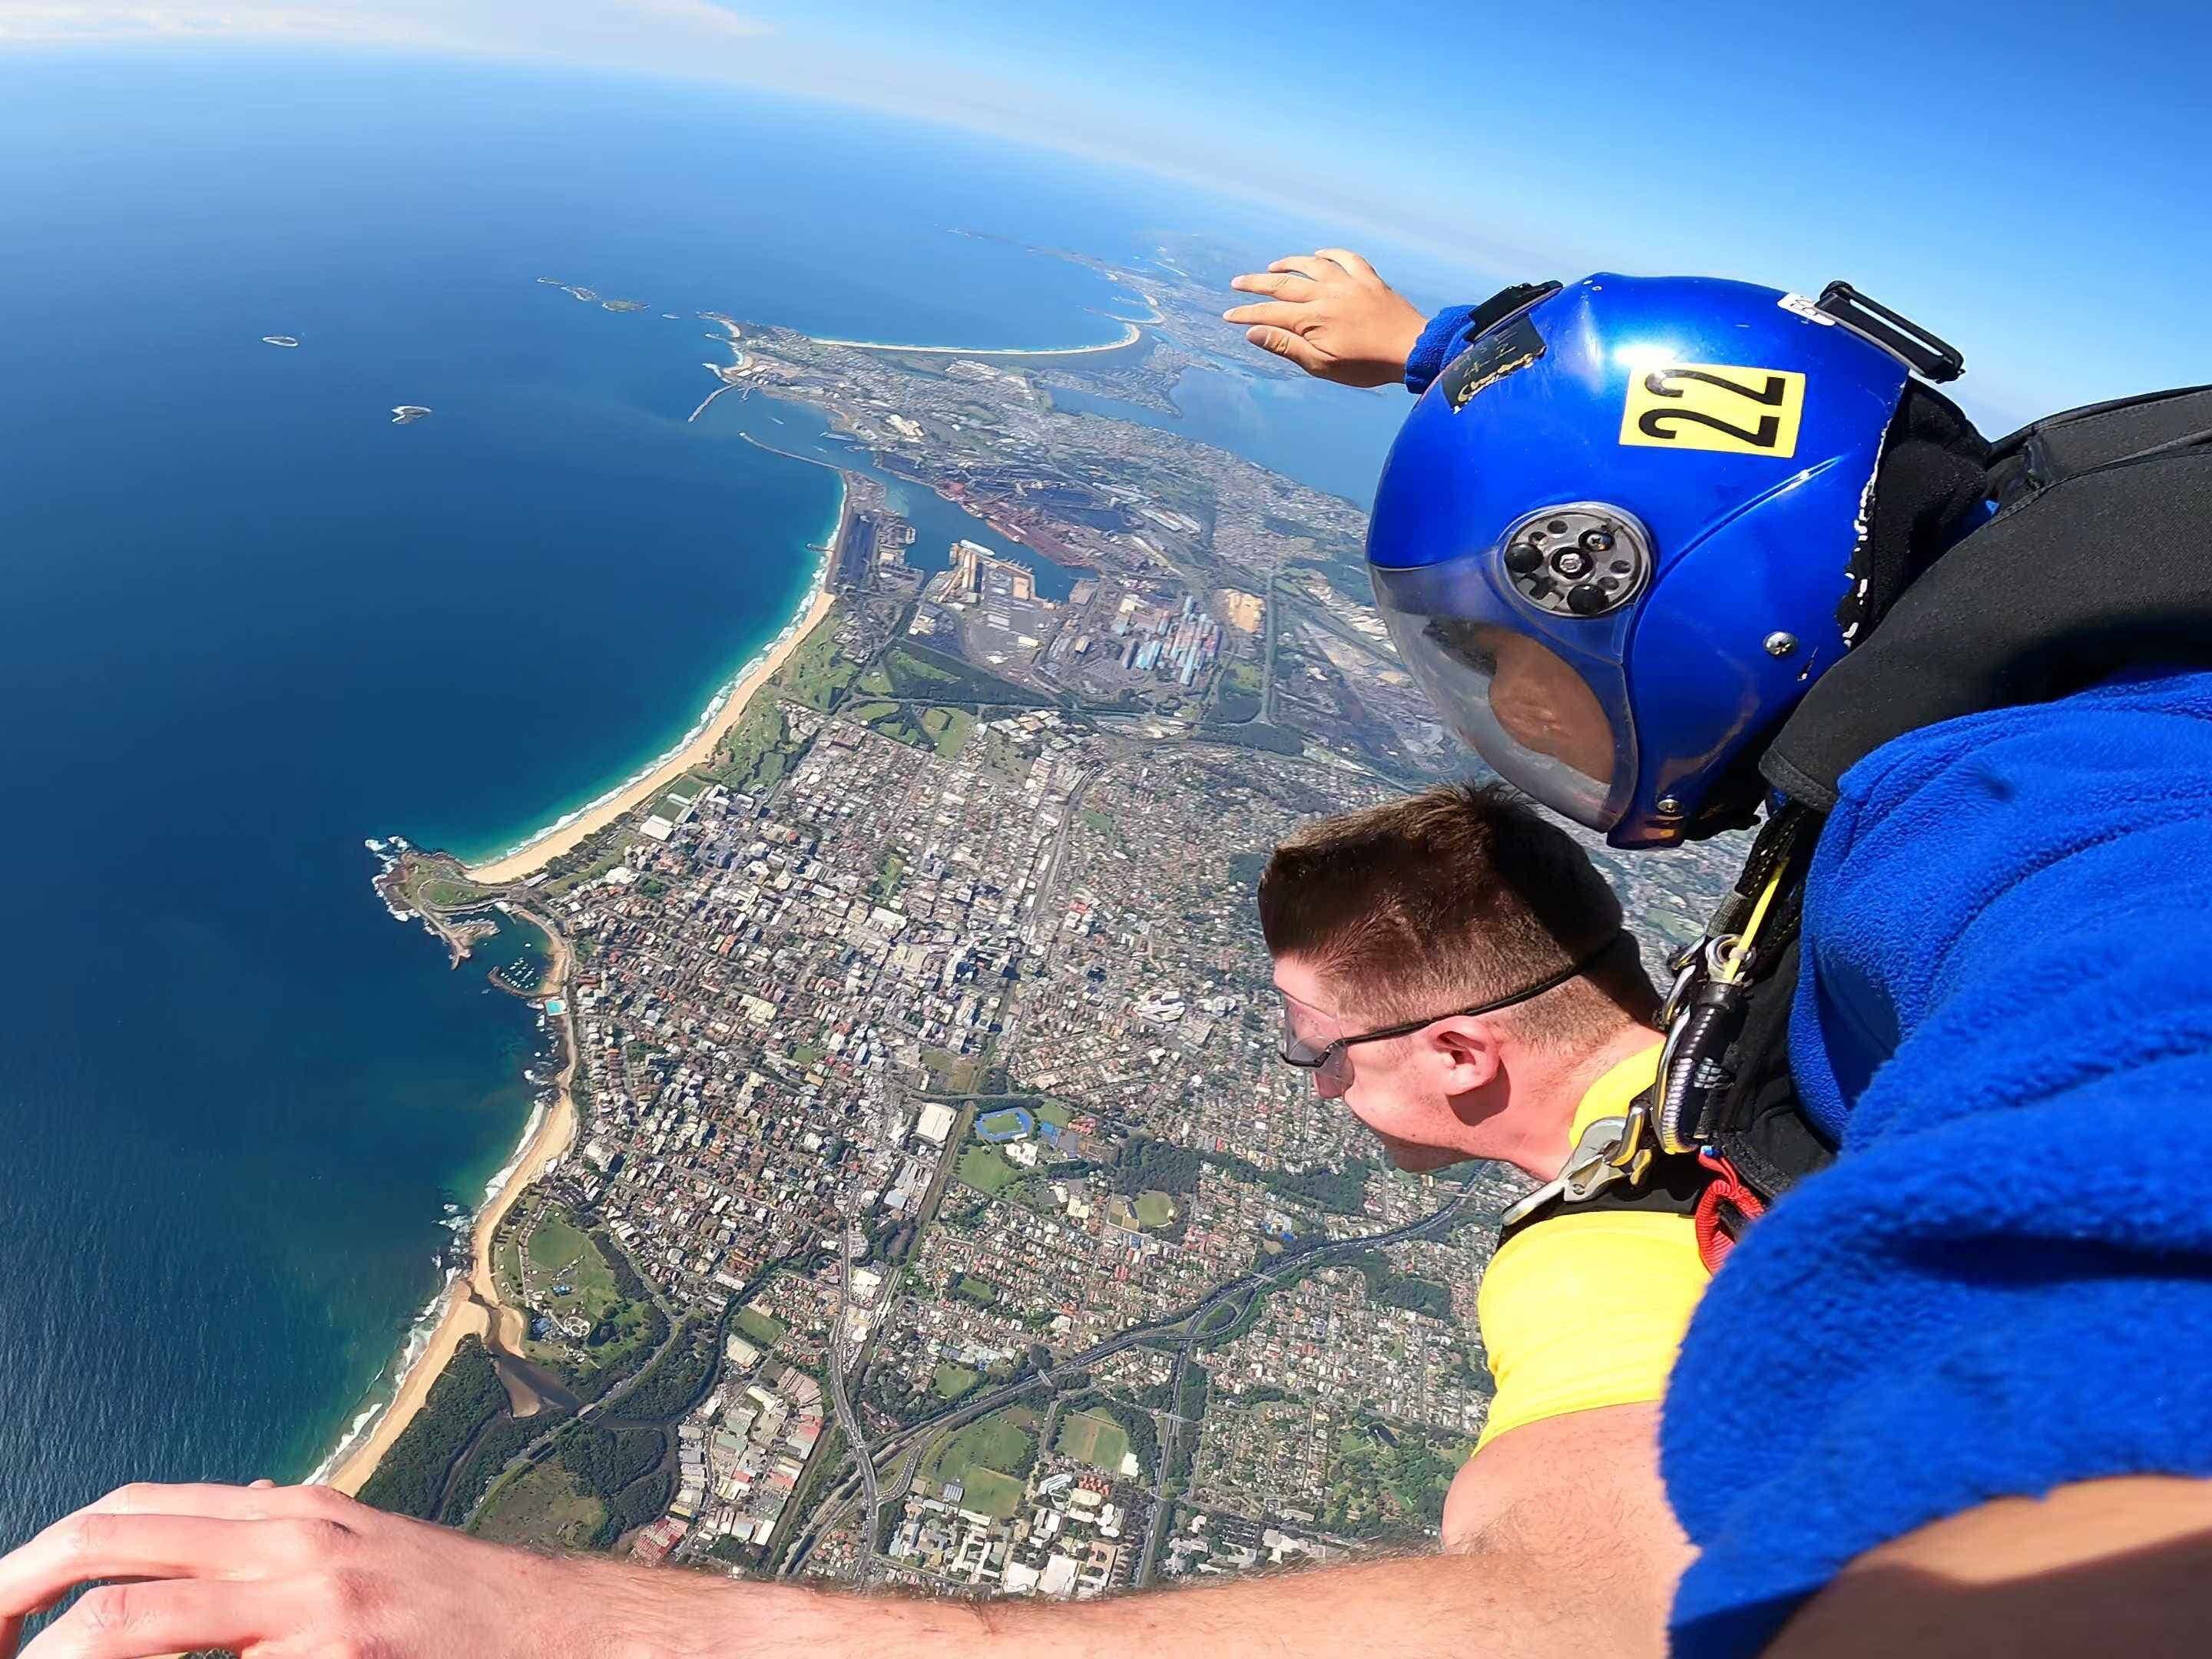 Brothers go sky high in Australia to aid charity which supported their mother